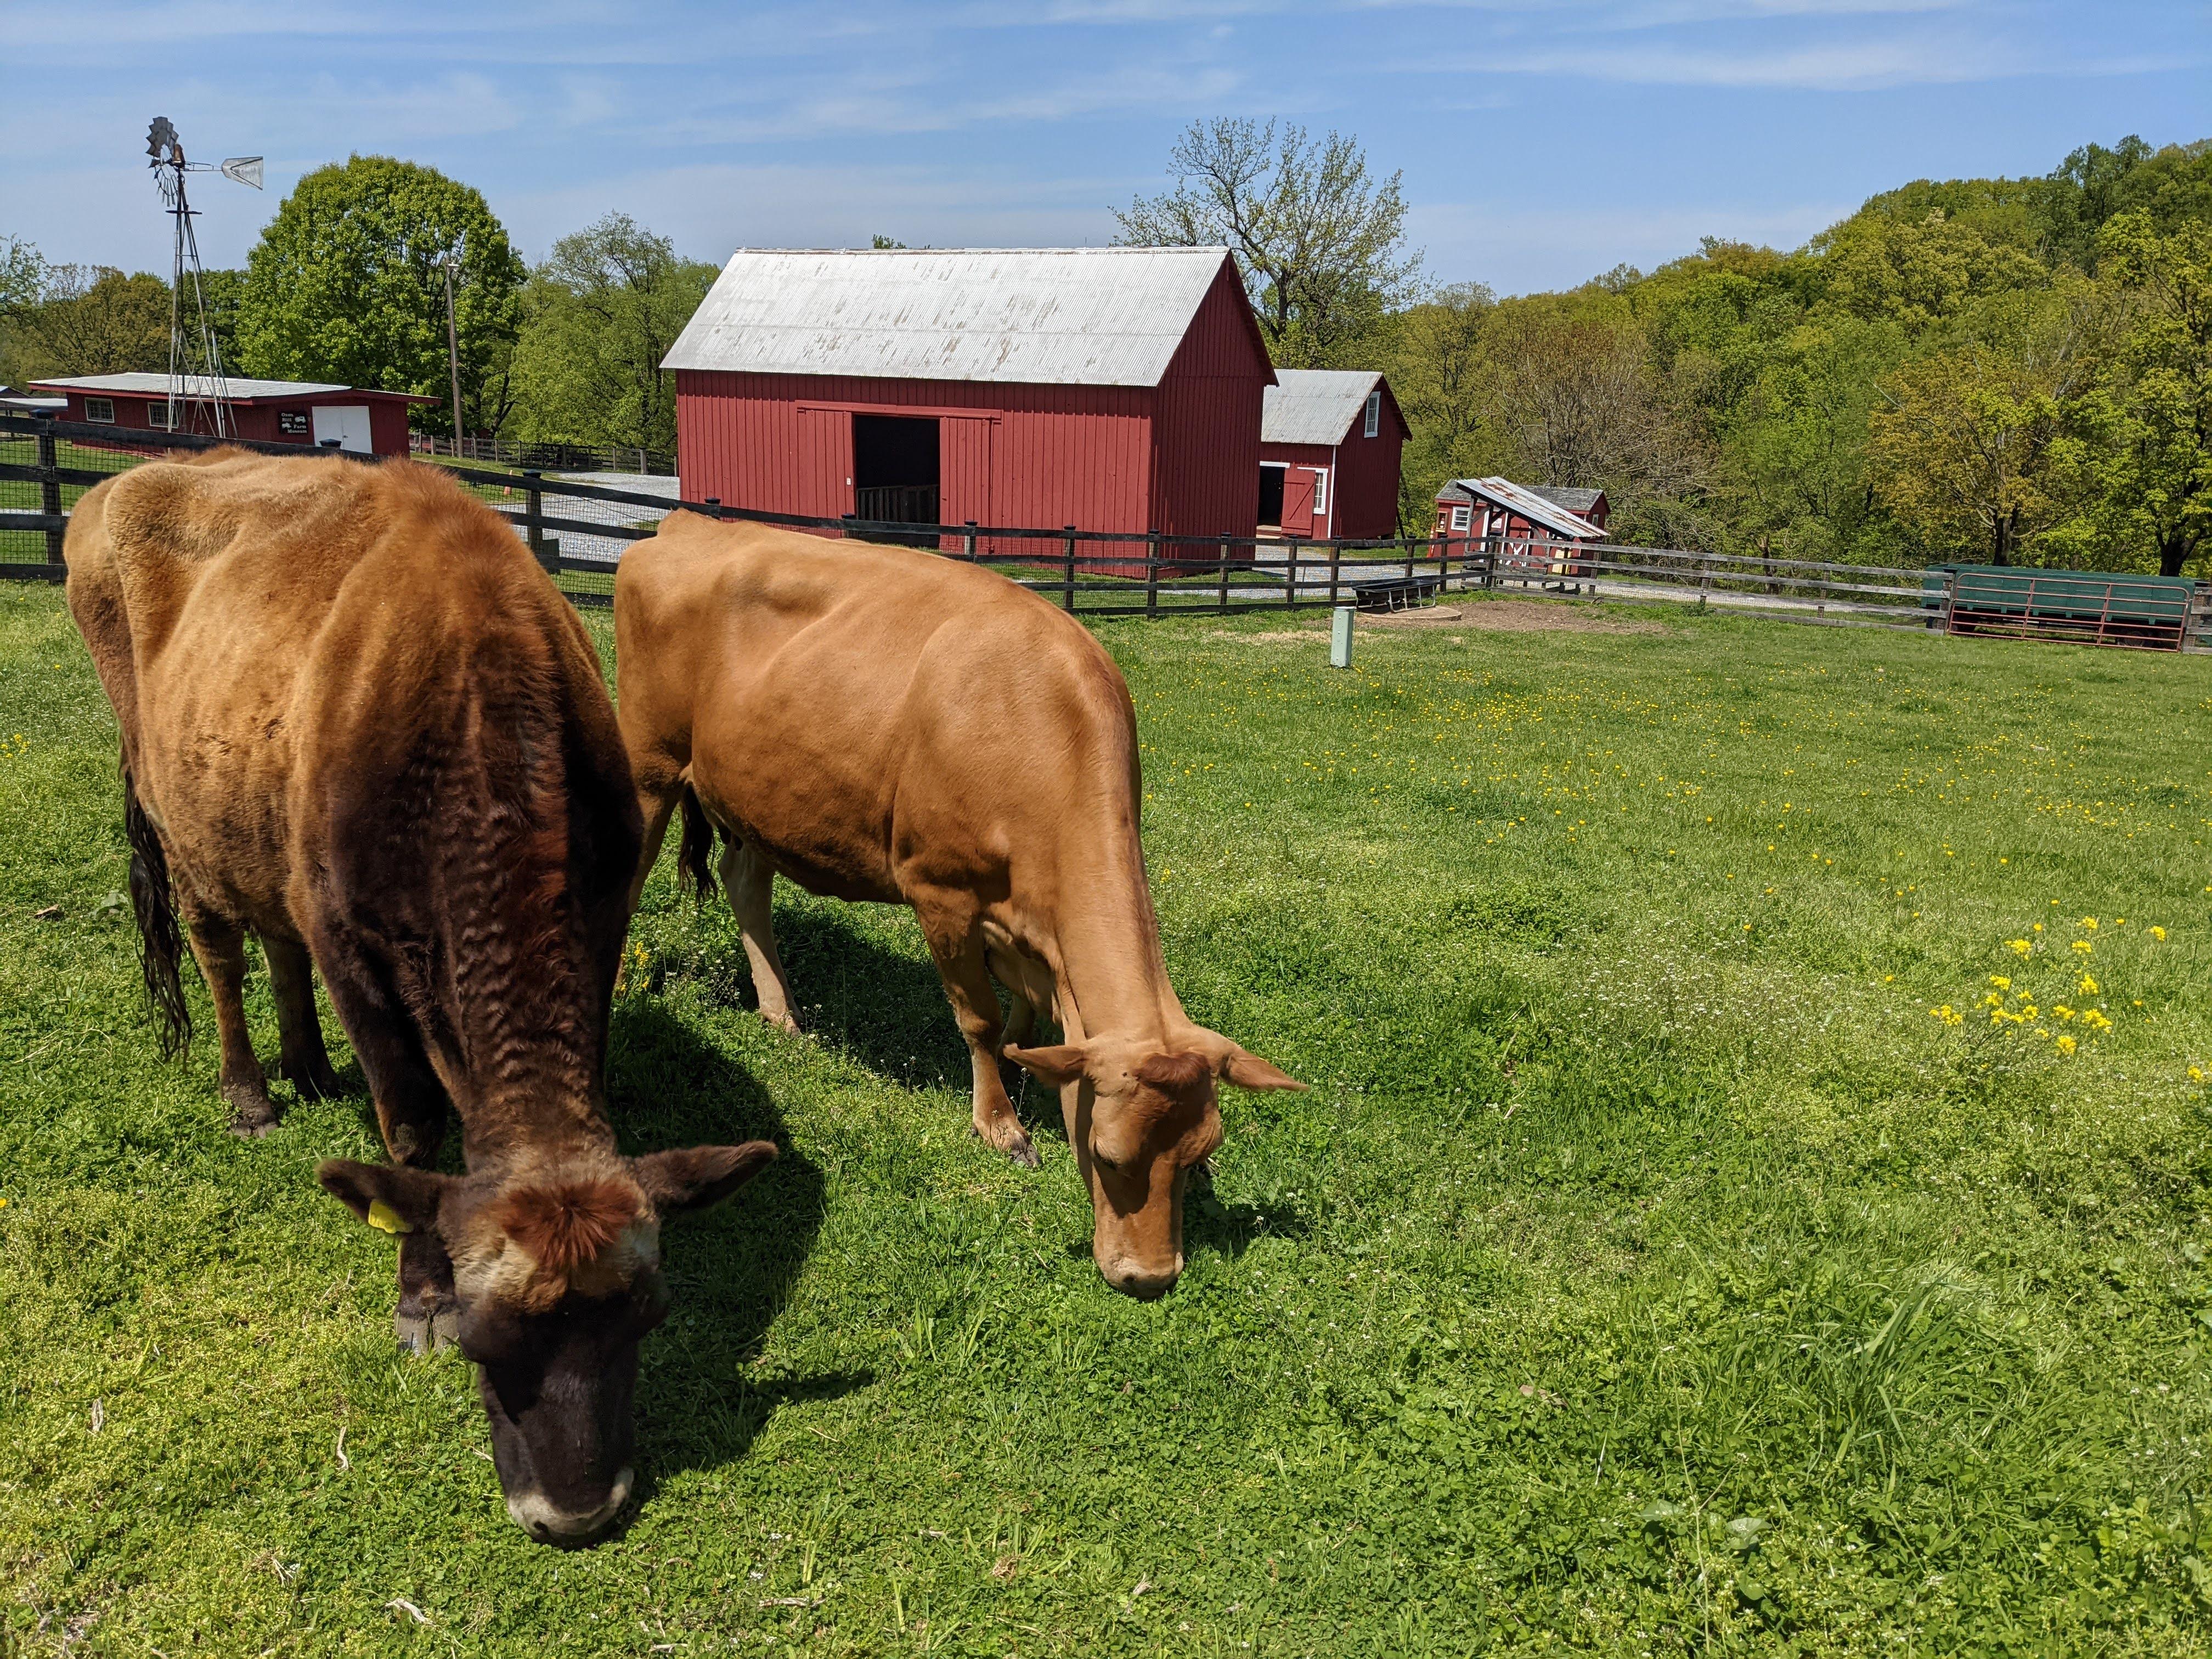 Two brown cows graze in a field